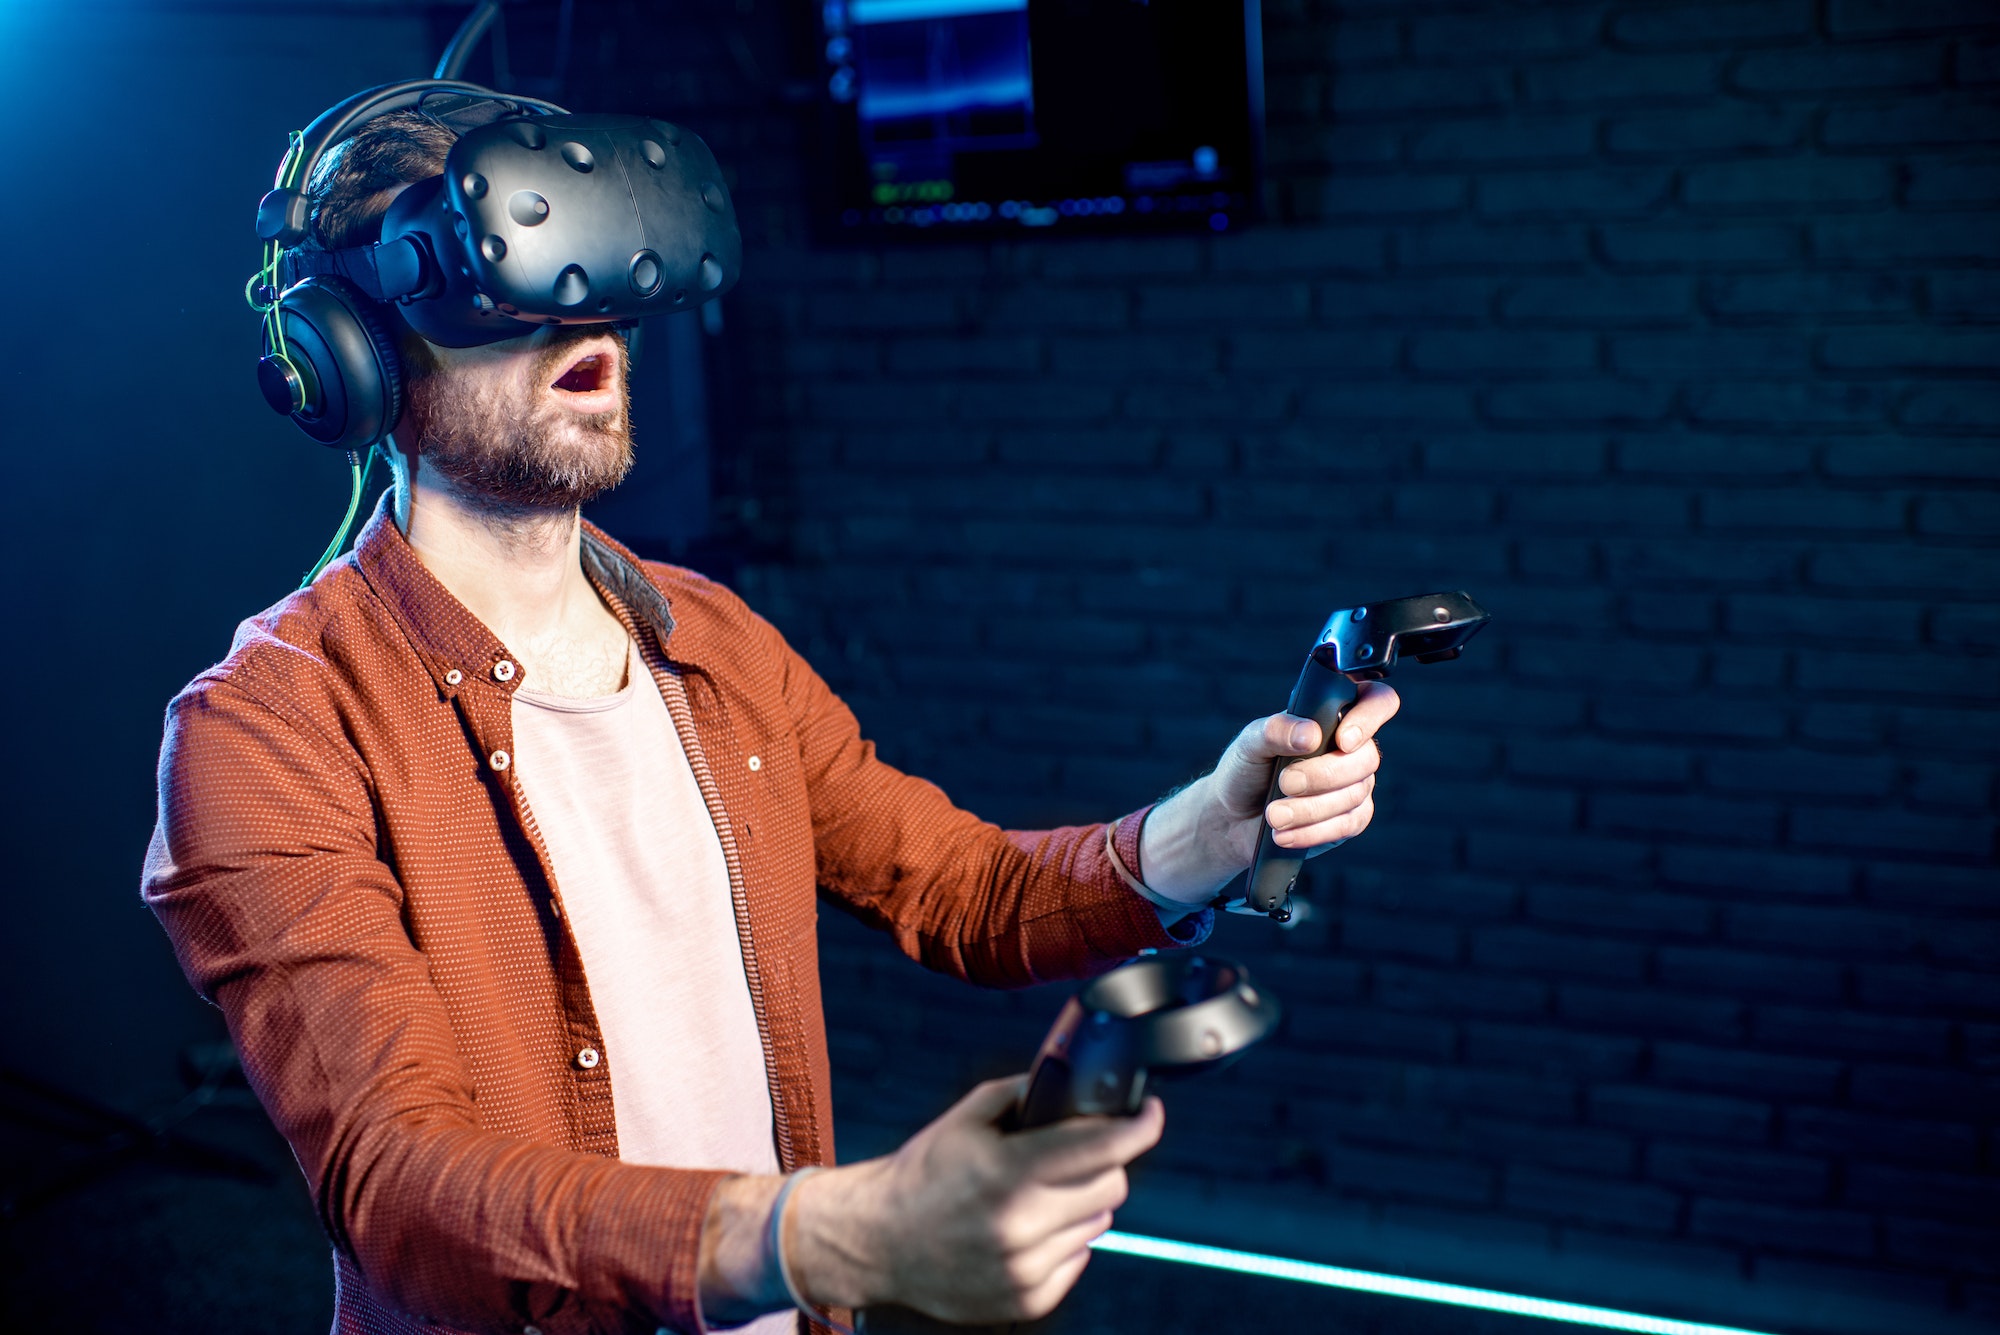 Man playing game with virtual reality headset in the club